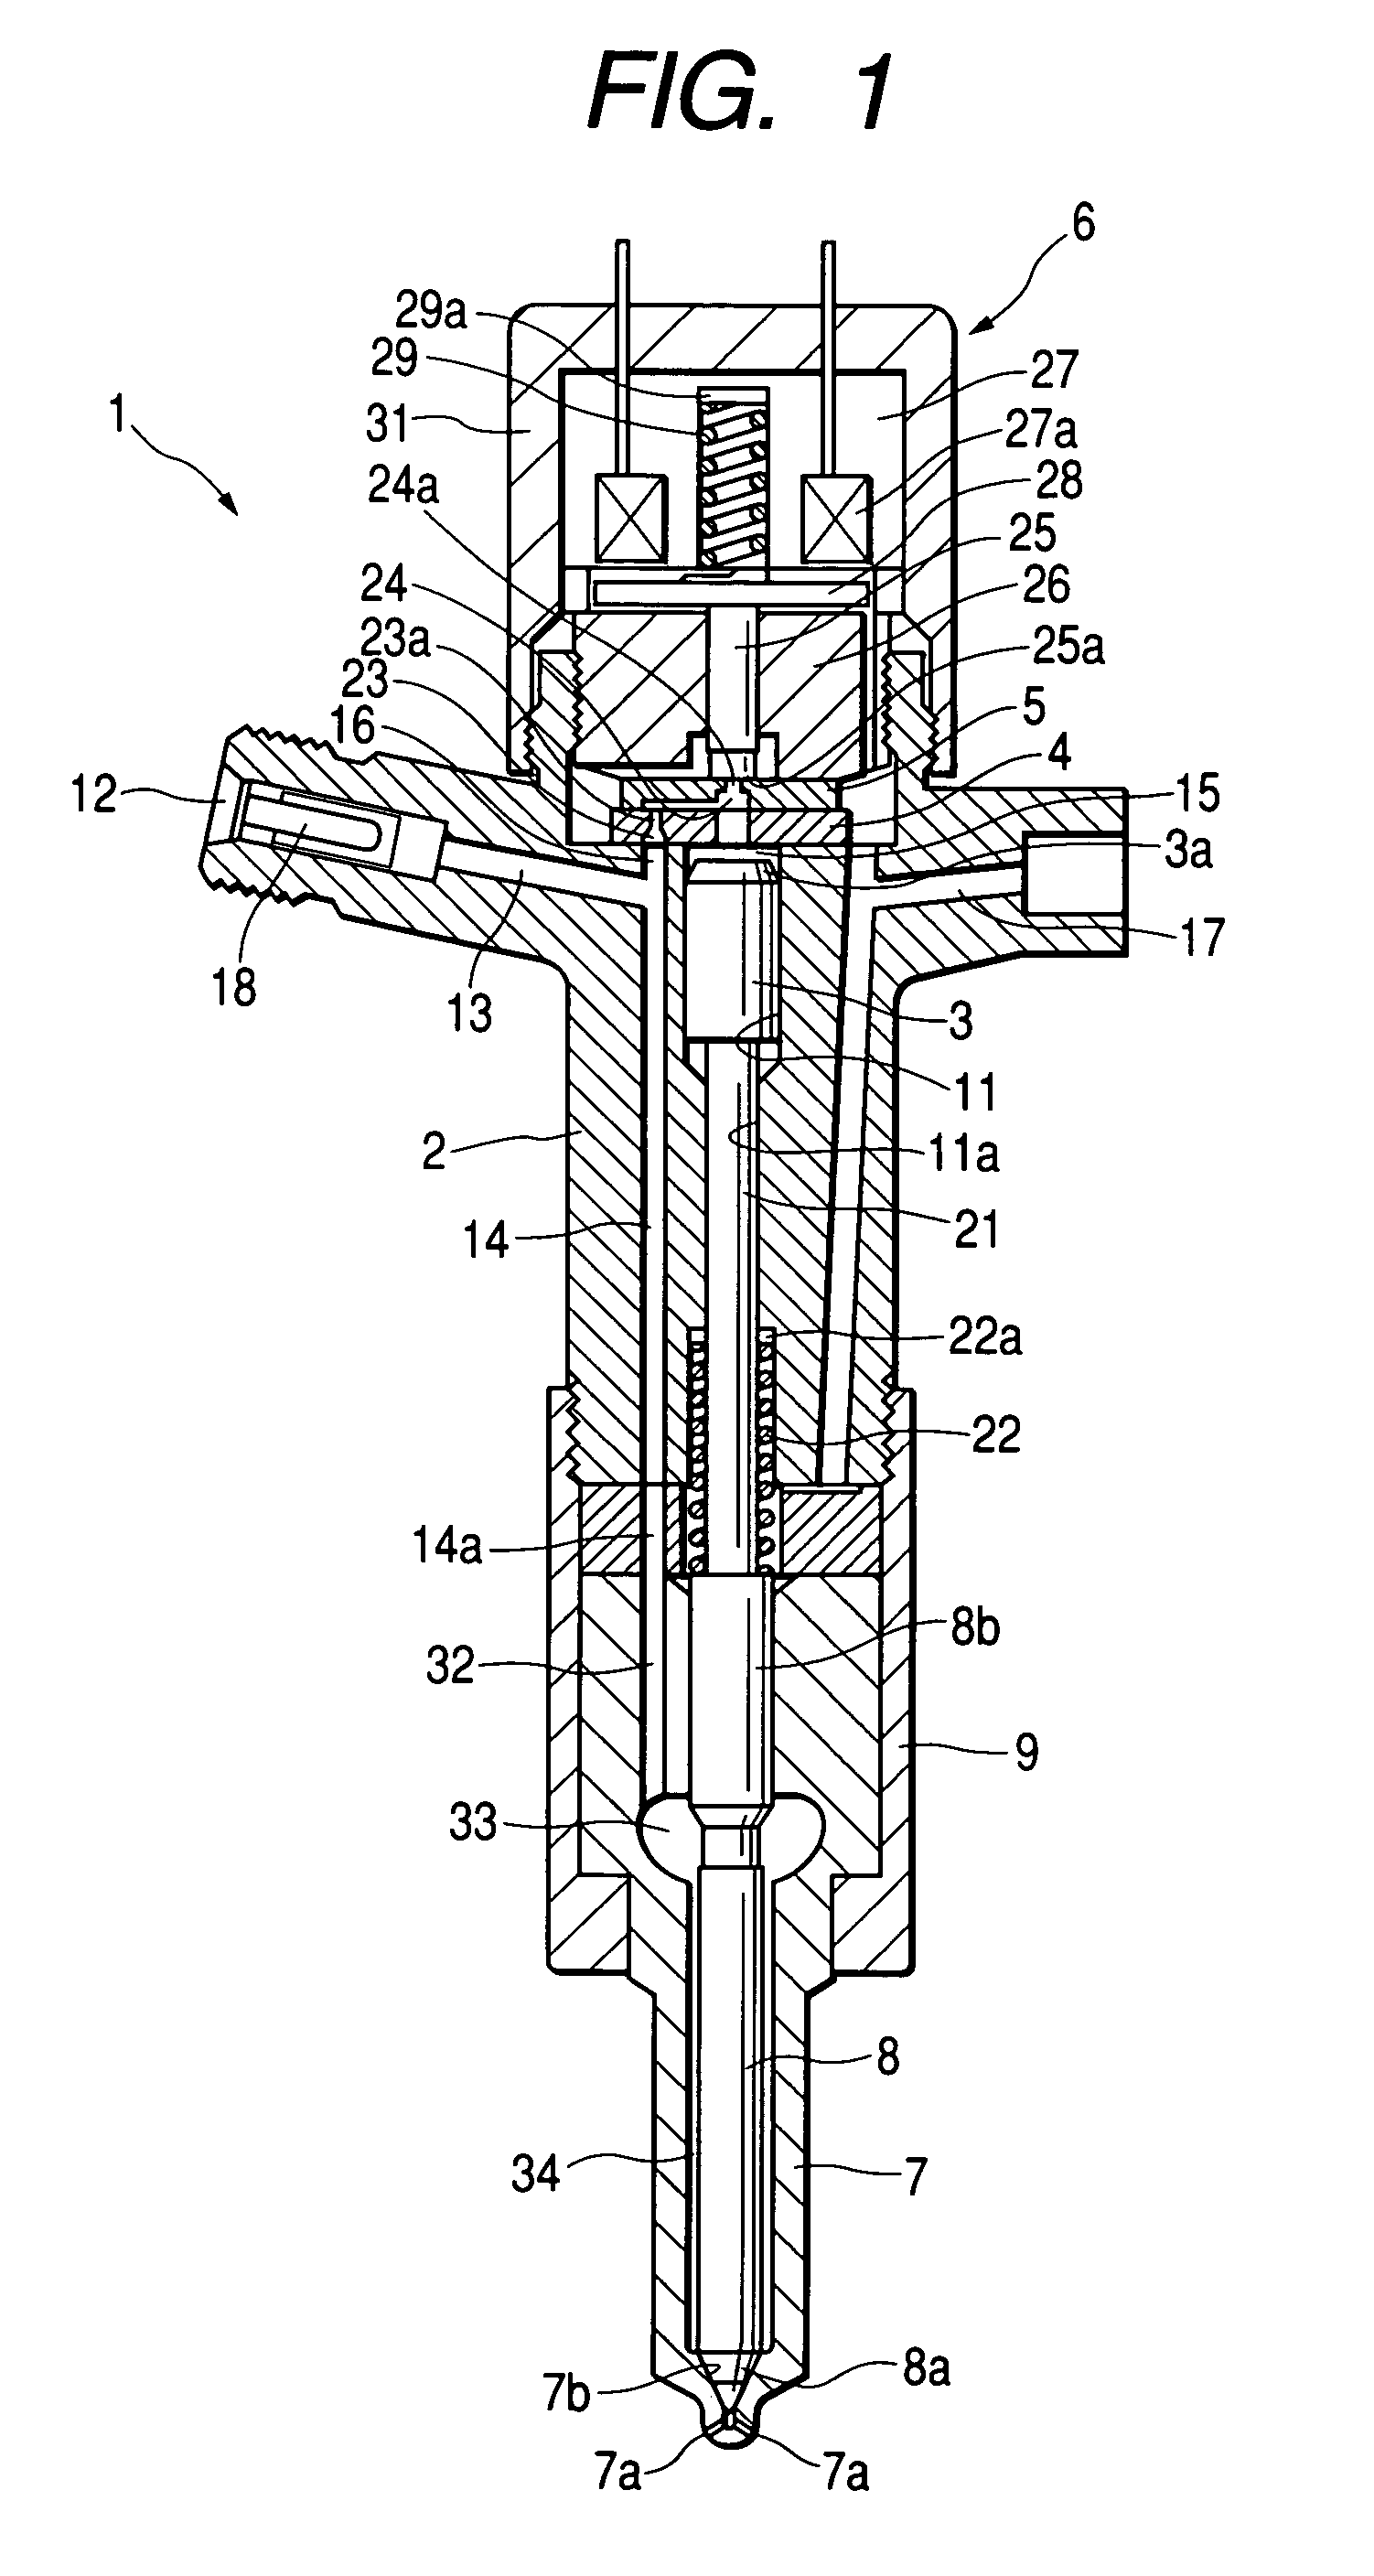 Constituent parts assembling method for an actuating apparatus